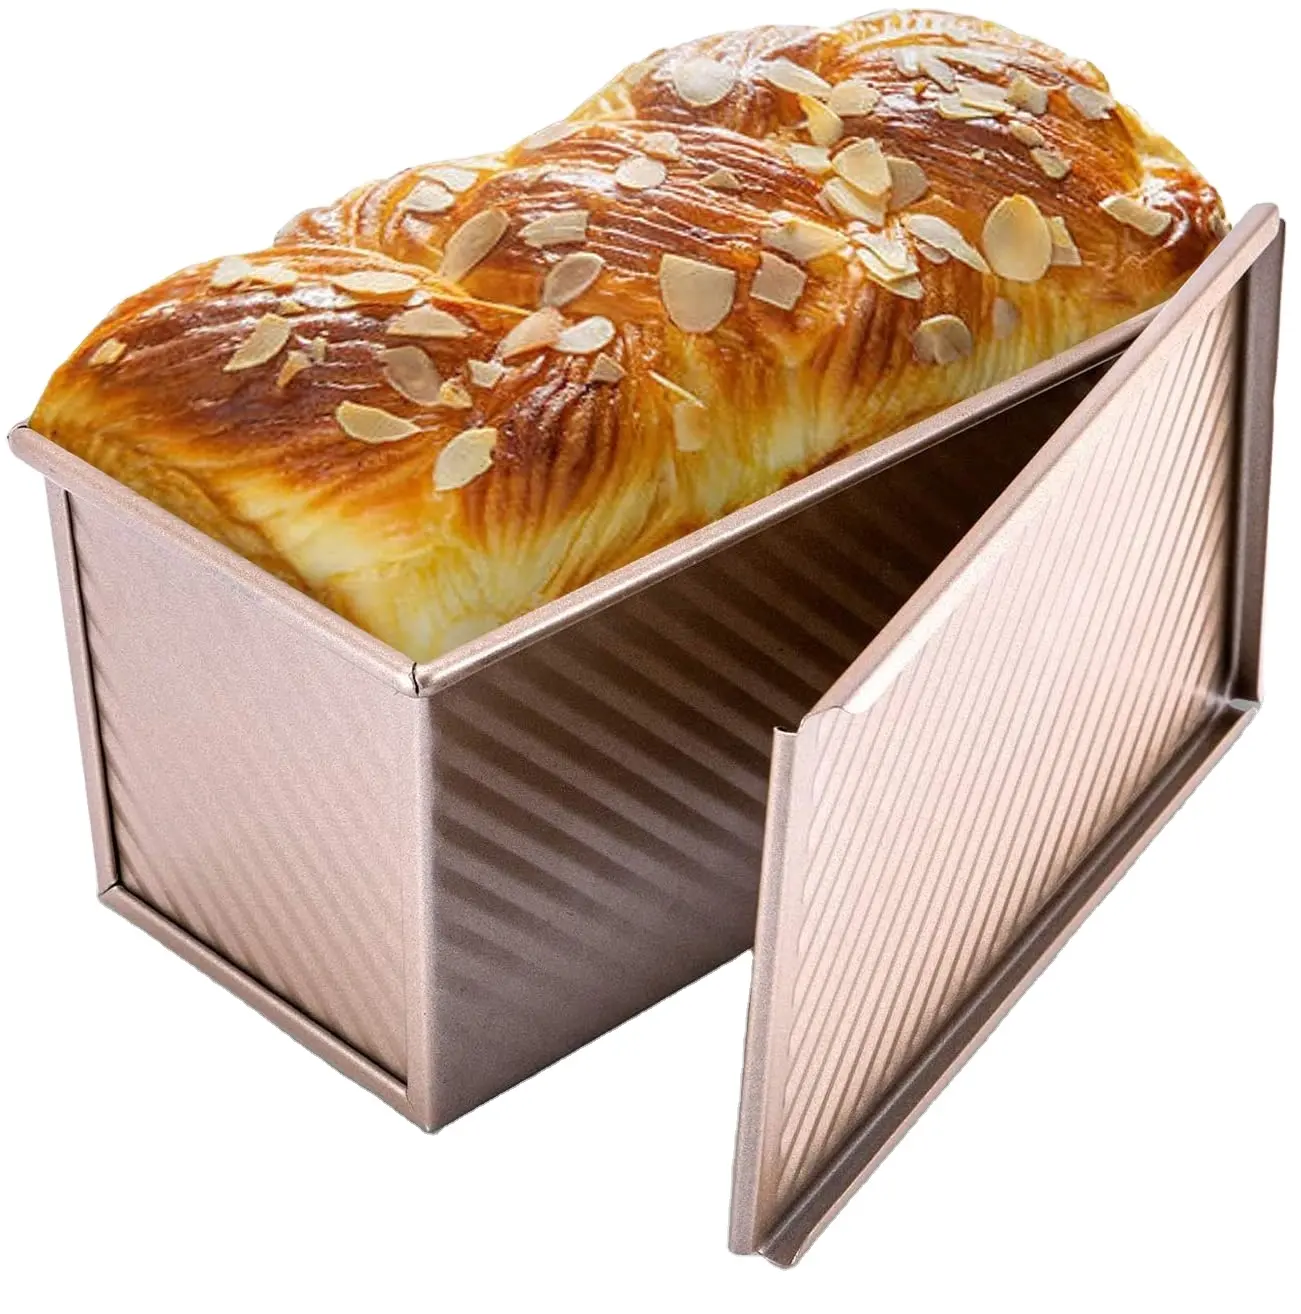 LJW Pullman Loaf Pan with Lid Bakeware for Baking Bread Carbon Steel Corrugated Bread Toast Box Non Stick Bread Mould bakeware